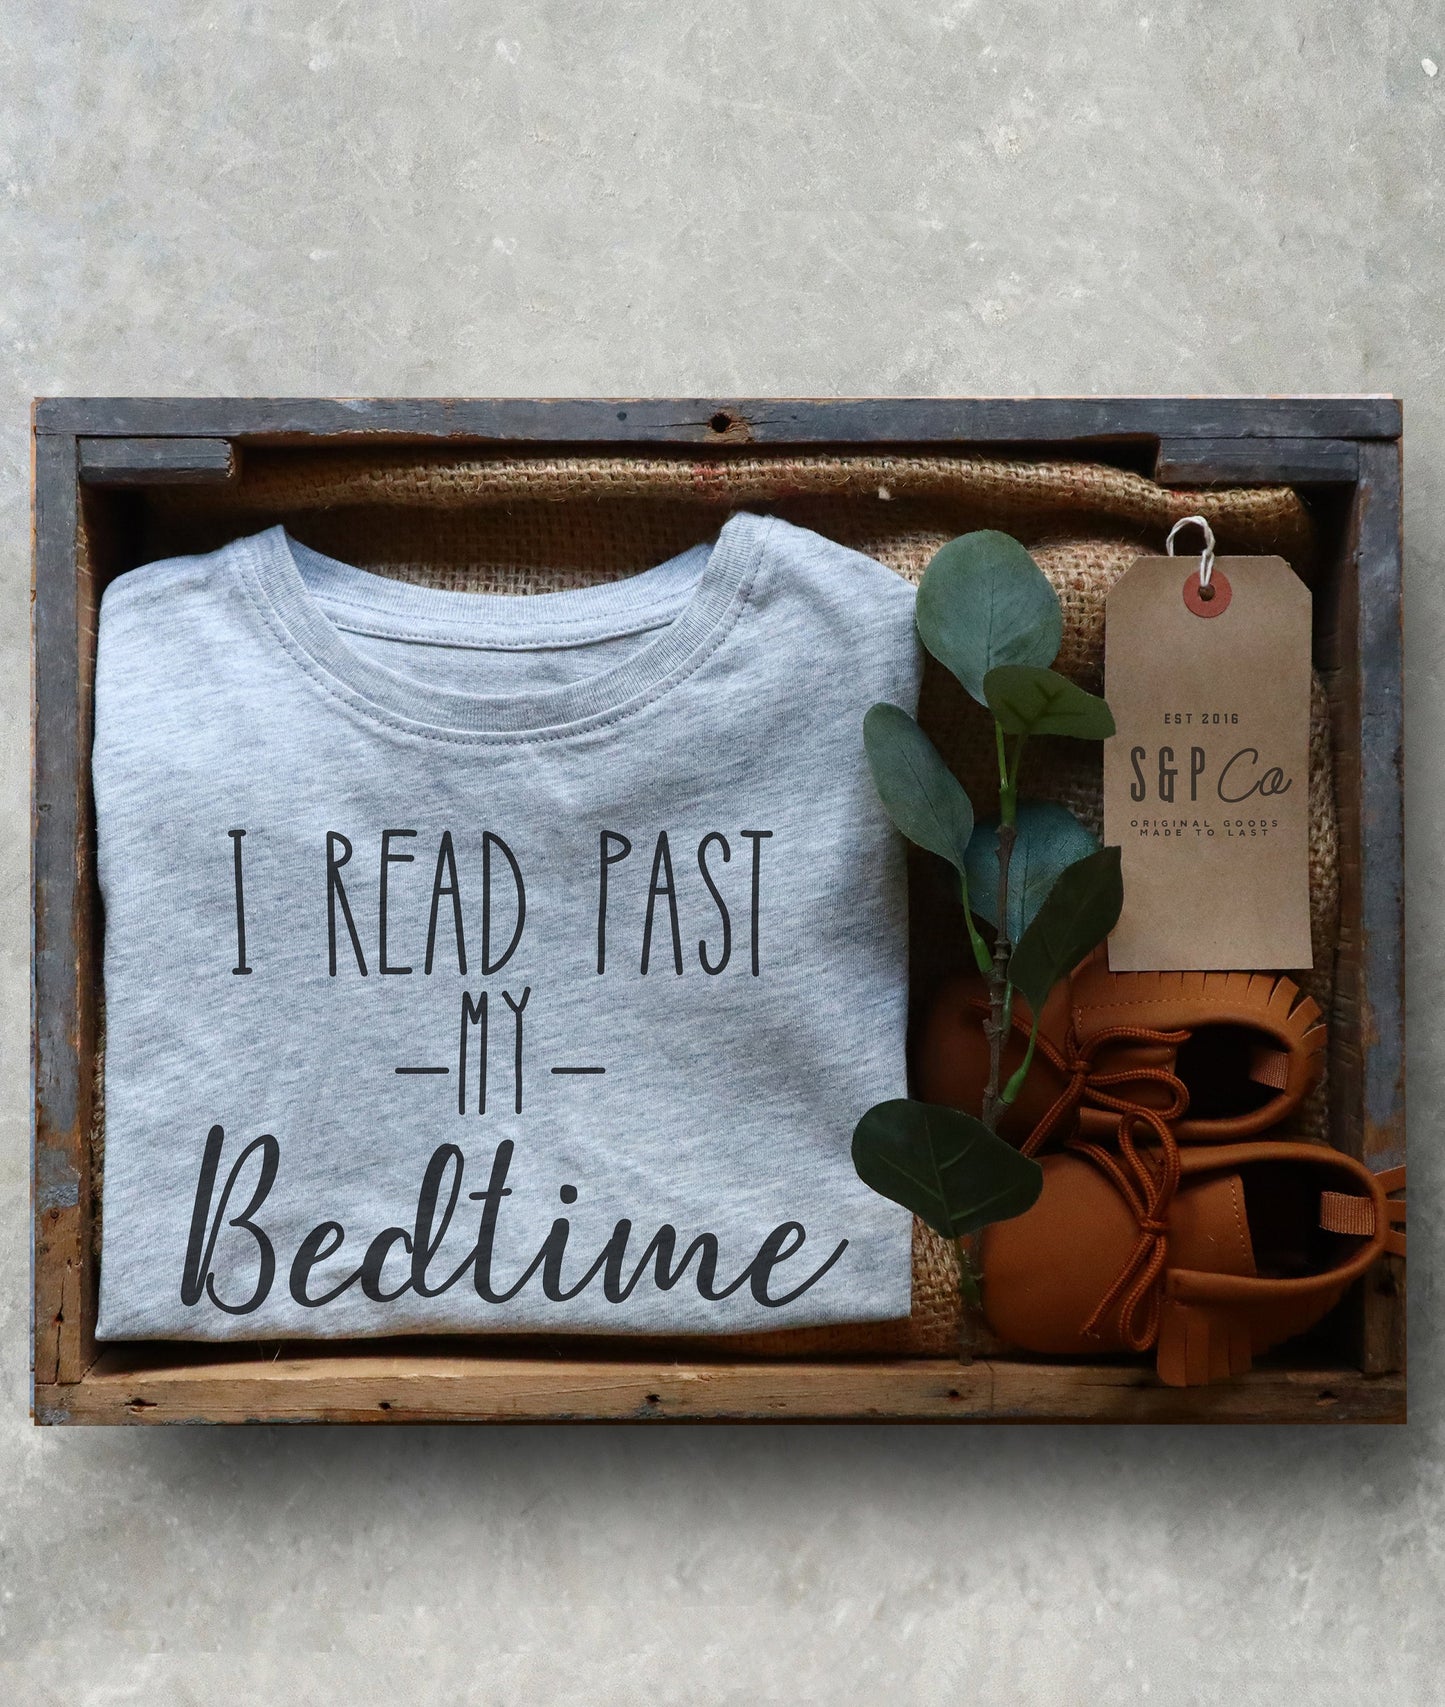 I Read Past My Bedtime Kids Shirt -  book lover t shirts - book lover gift - reading shirt - book lover gifts - bookworm gift